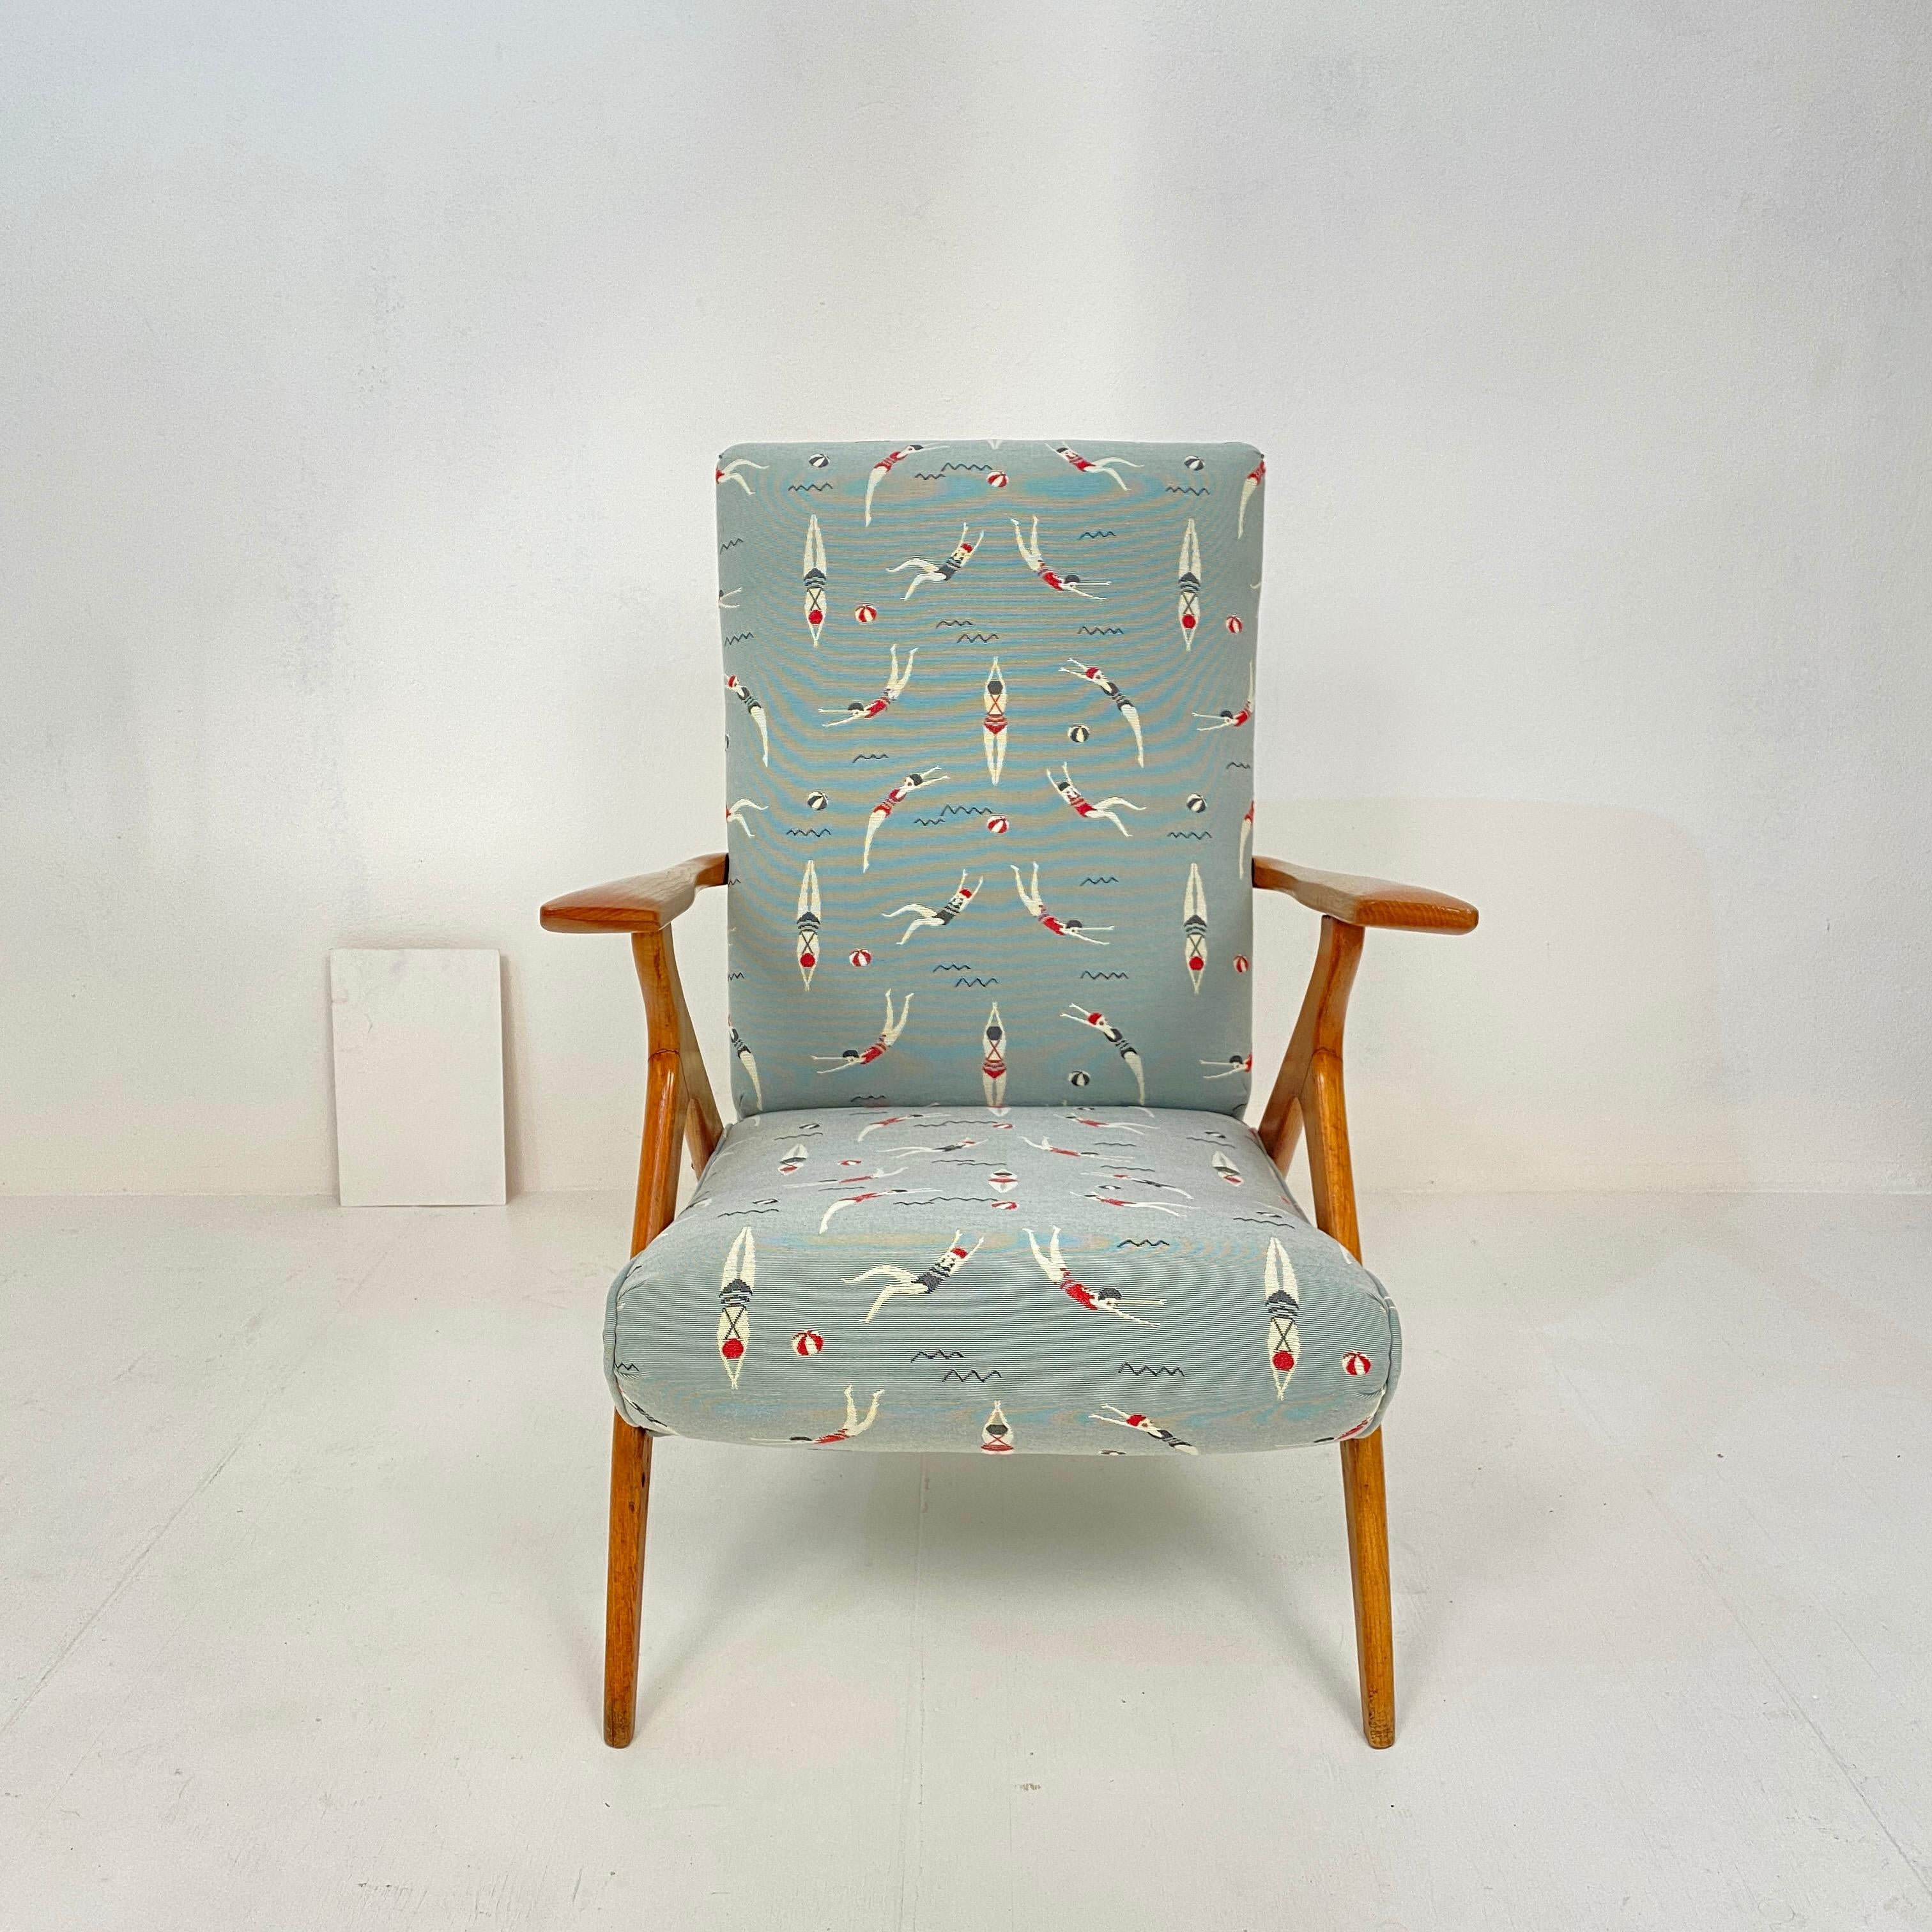 This midcentury Italian lounge chair by Antonio Gorgone was made circa 1951.
The wooden frame is made out of ash and has got a beautiful Patina.
The upholstery was reupholstered in a Malibu Beach fabric by Jab Anstoetz.
It can be adjusted in two